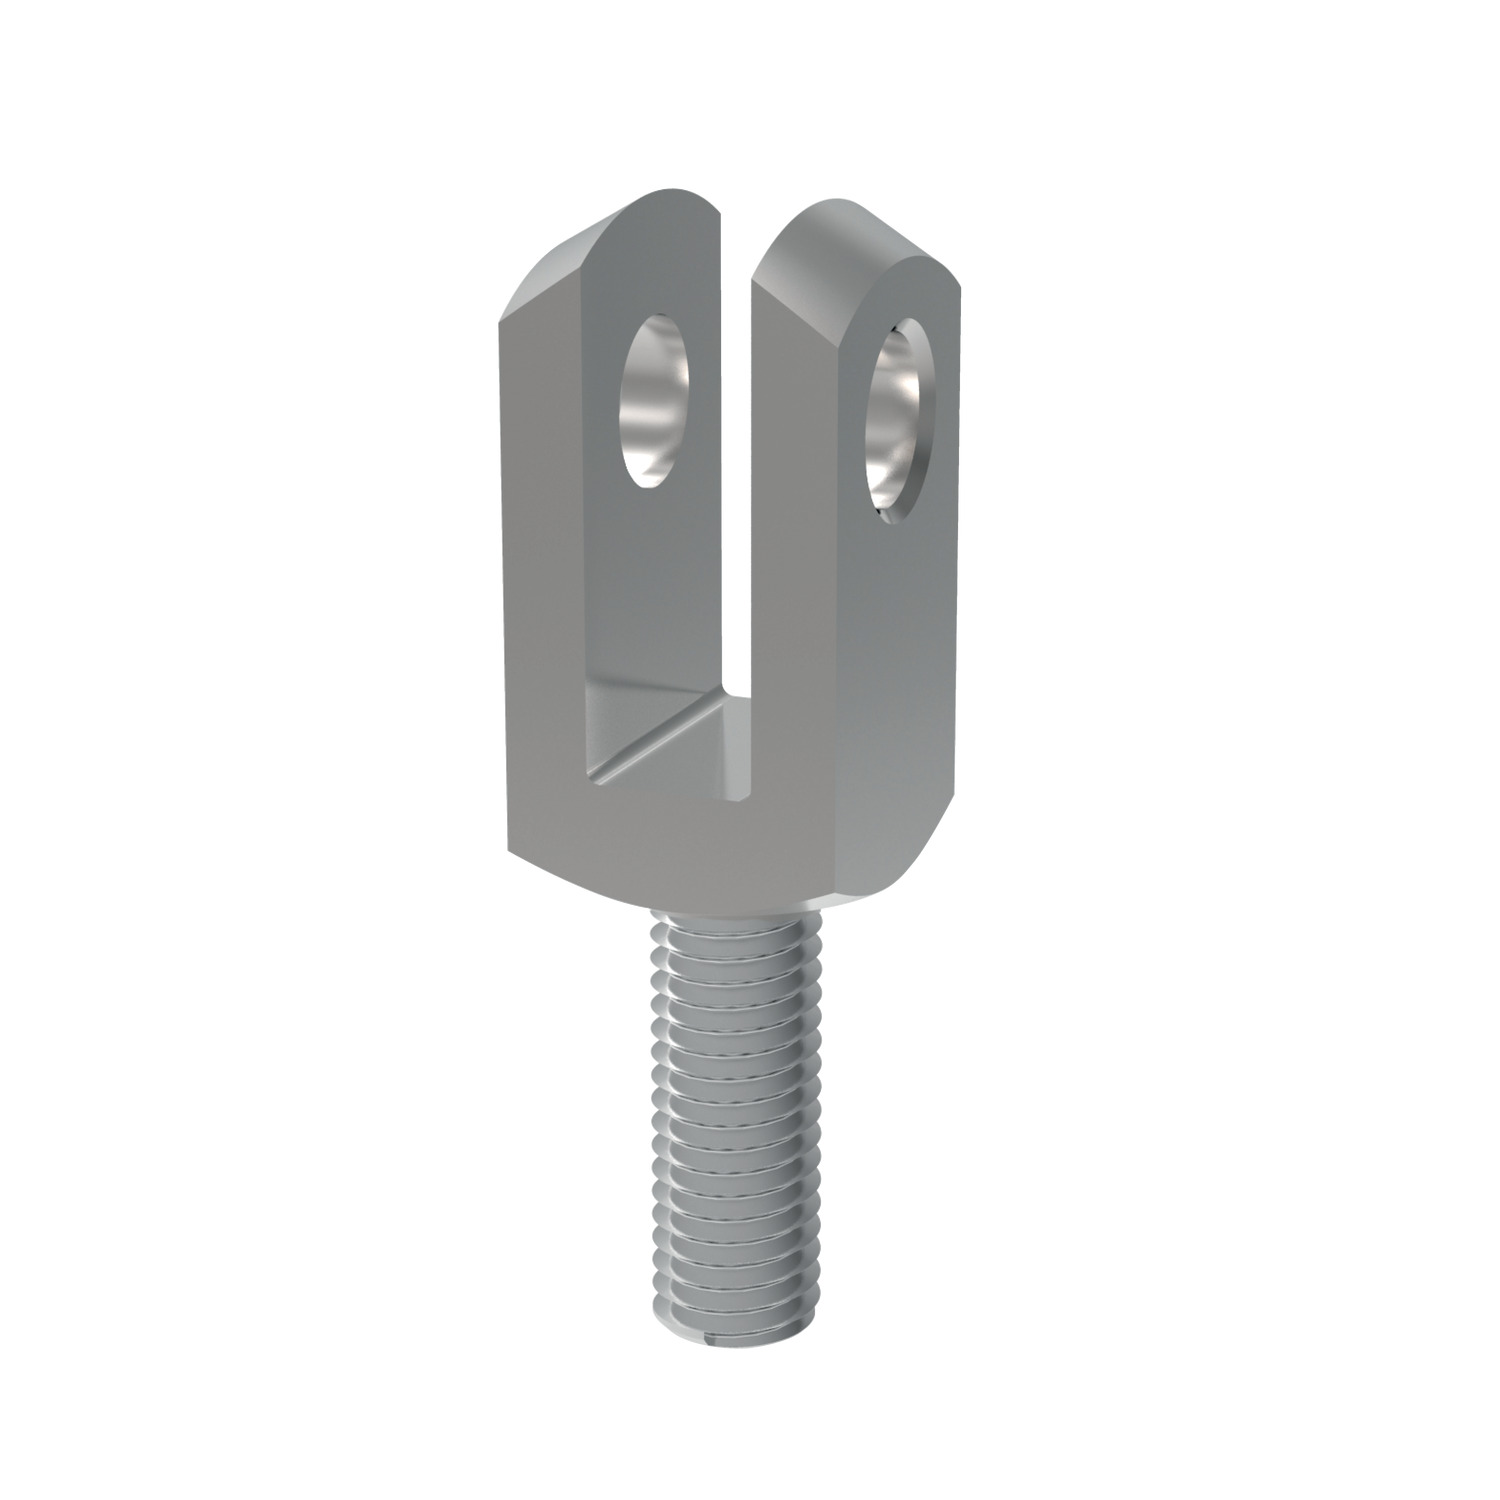 Clevis Joints - Male - Steel Our steel male clevis joints are available in both left and right hand thread in sizes ranging from M6 to M20.